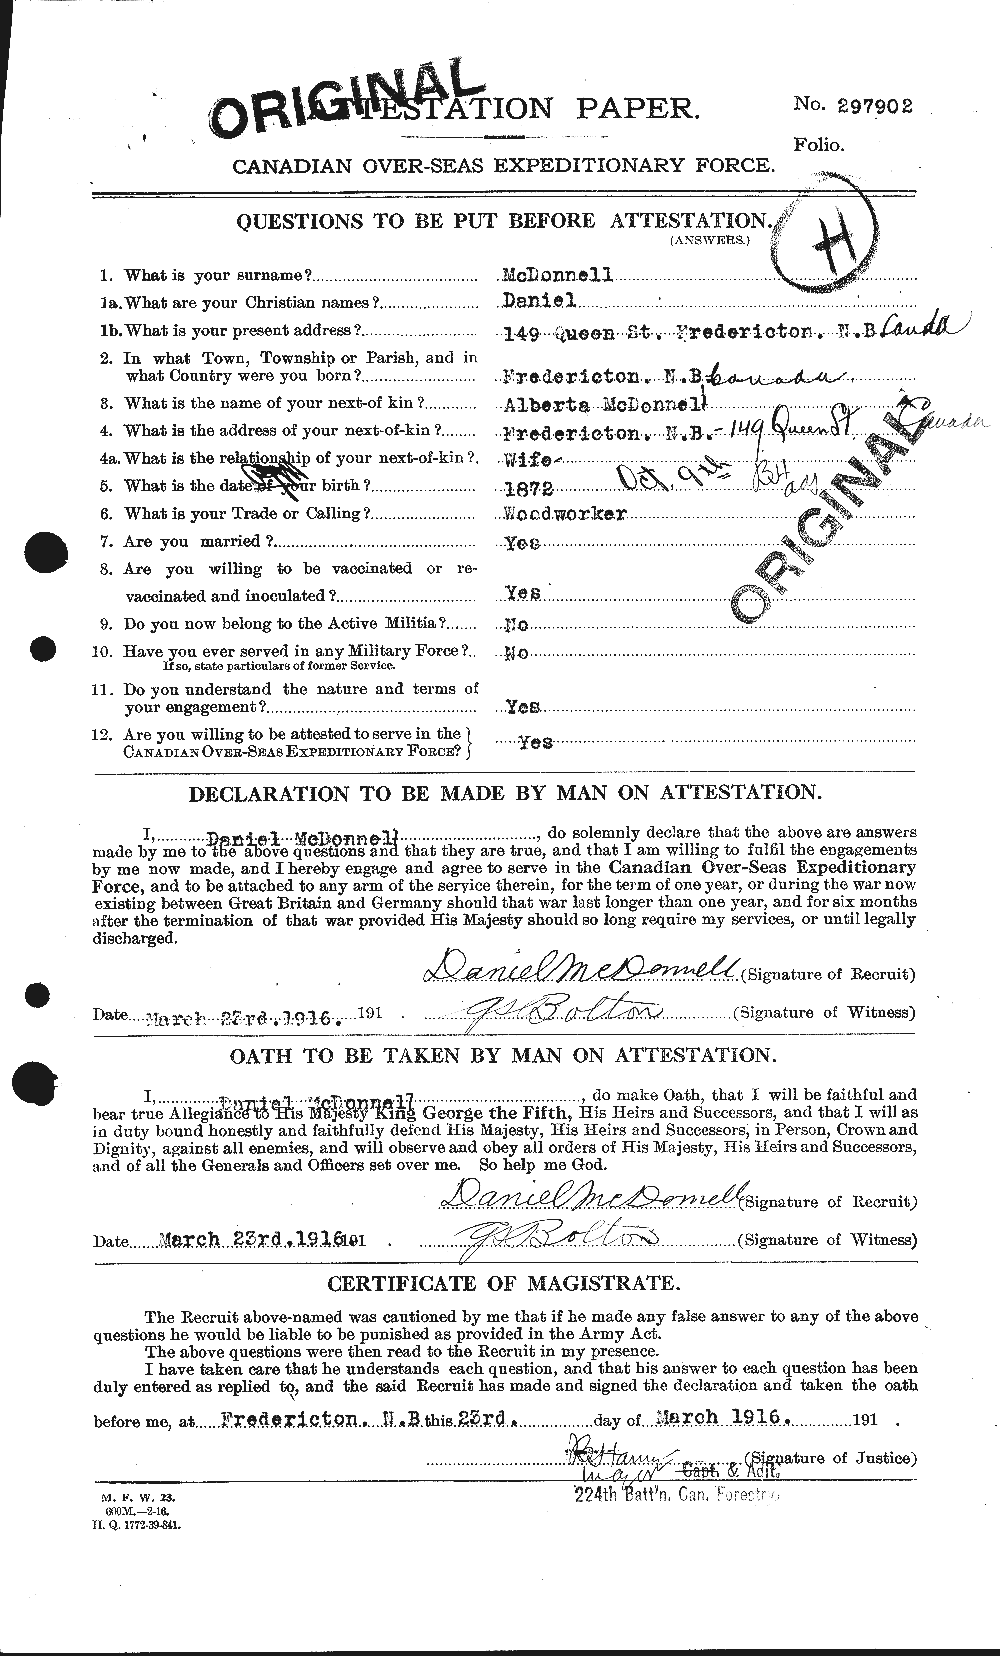 Personnel Records of the First World War - CEF 521468a